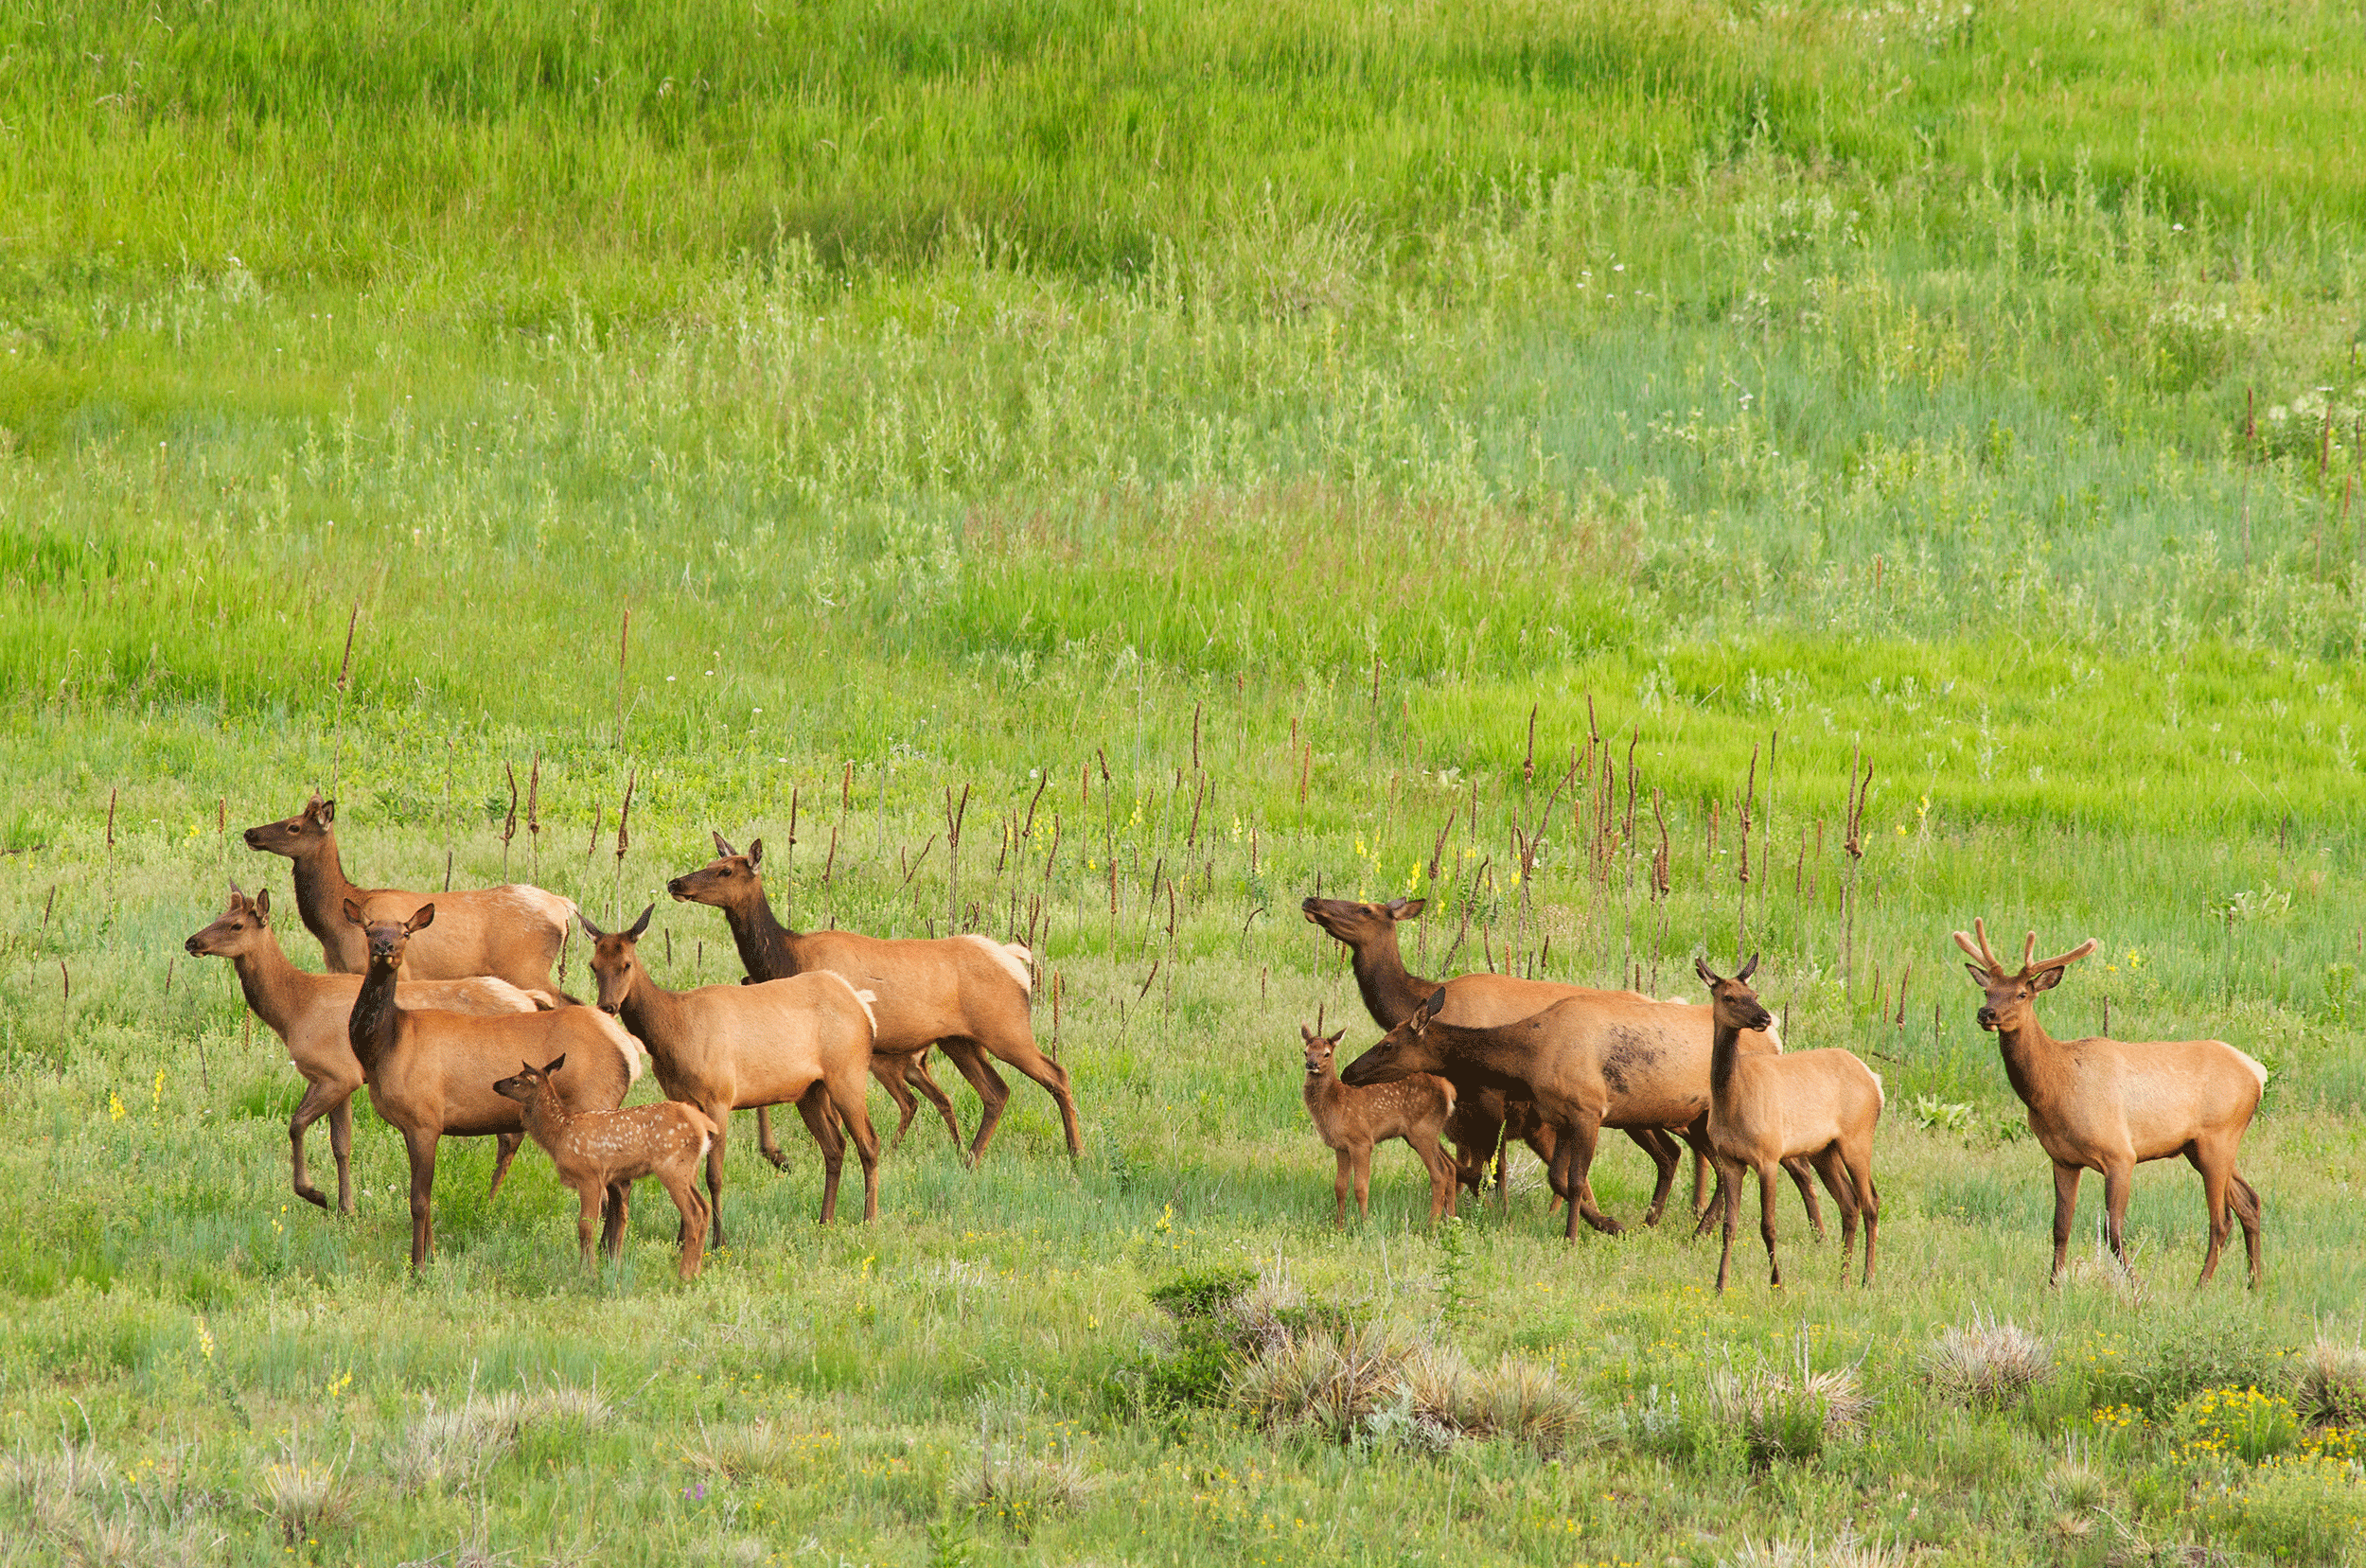 A herd of elk with calves in the green grass